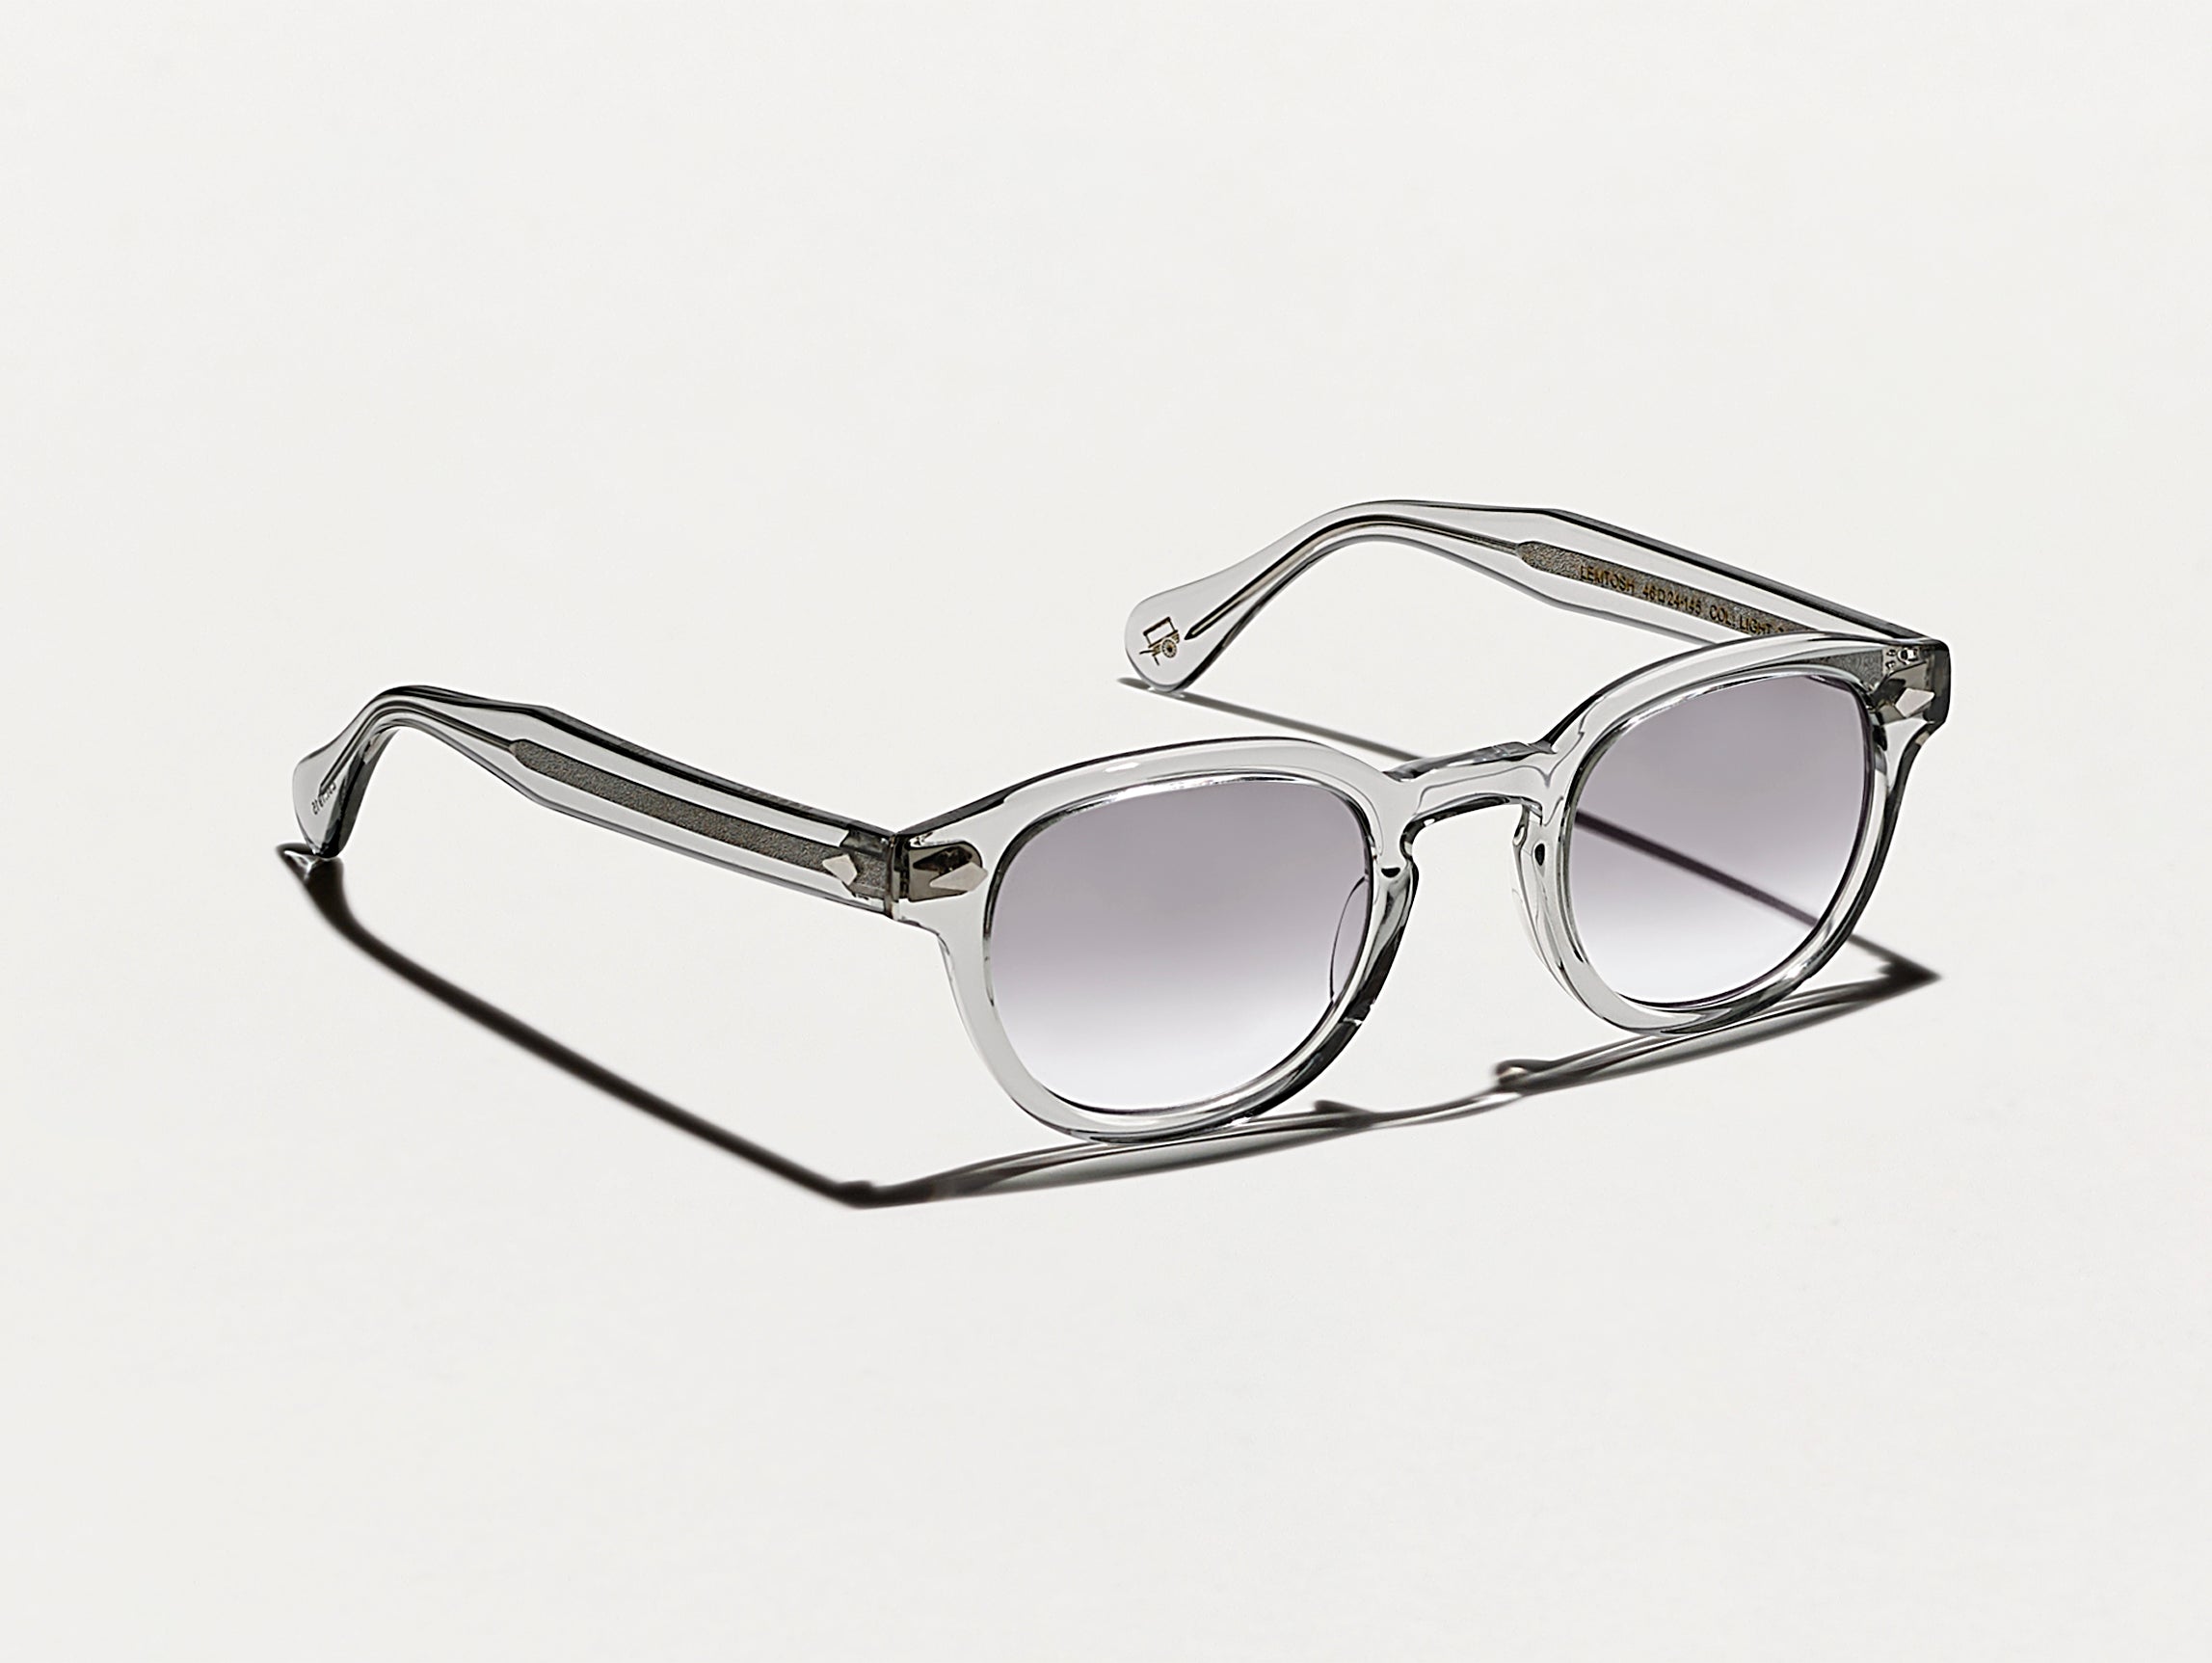 The LEMTOSH Light Grey with American Grey Fade Tinted Lenses